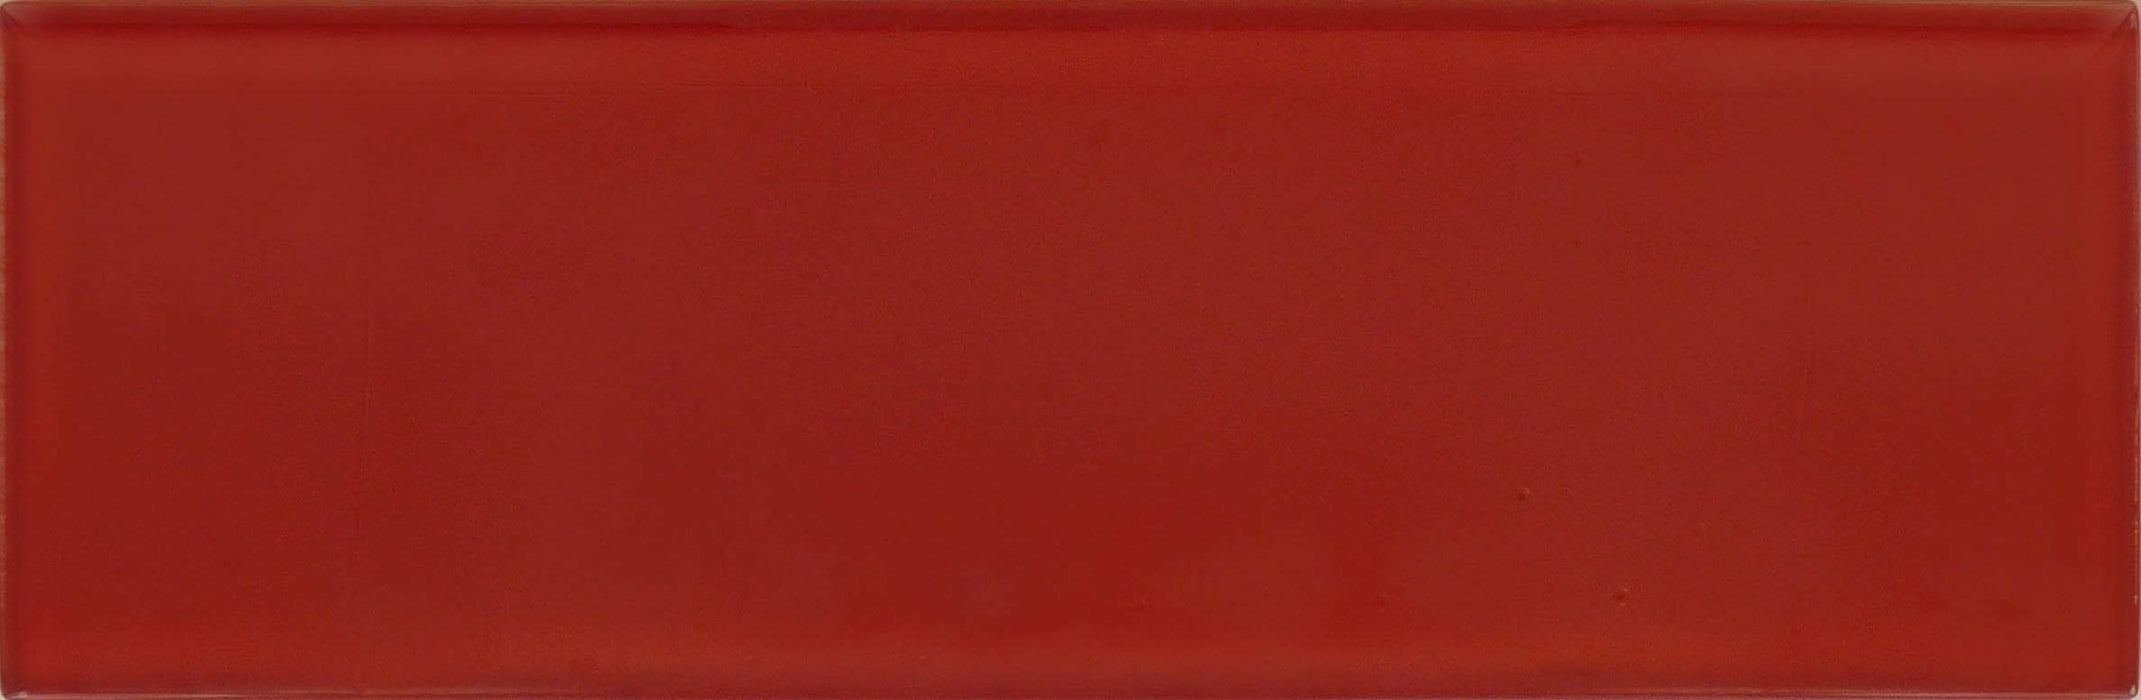 Cherry Red 4" x 12" Glossy Glass Subway Tile Tuscan Glass